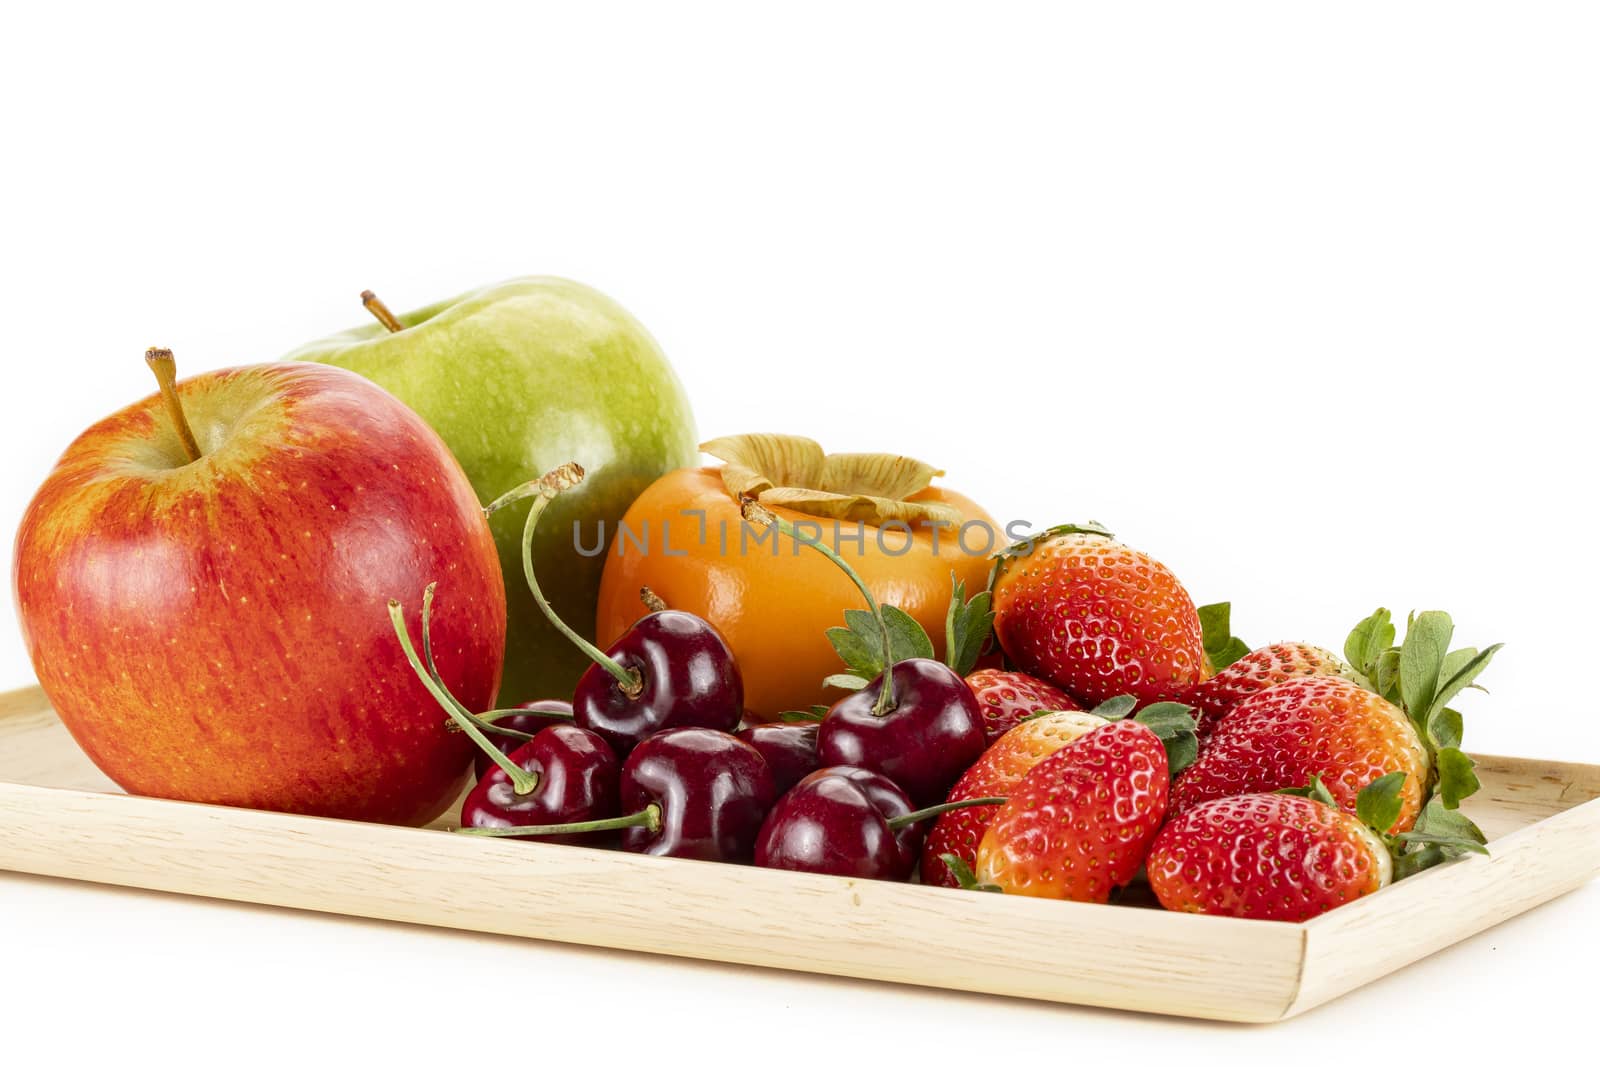 Fresh ripe red, and green apples, persimmon, cherries and strawberries on a wooden plate, isolated on a white background.